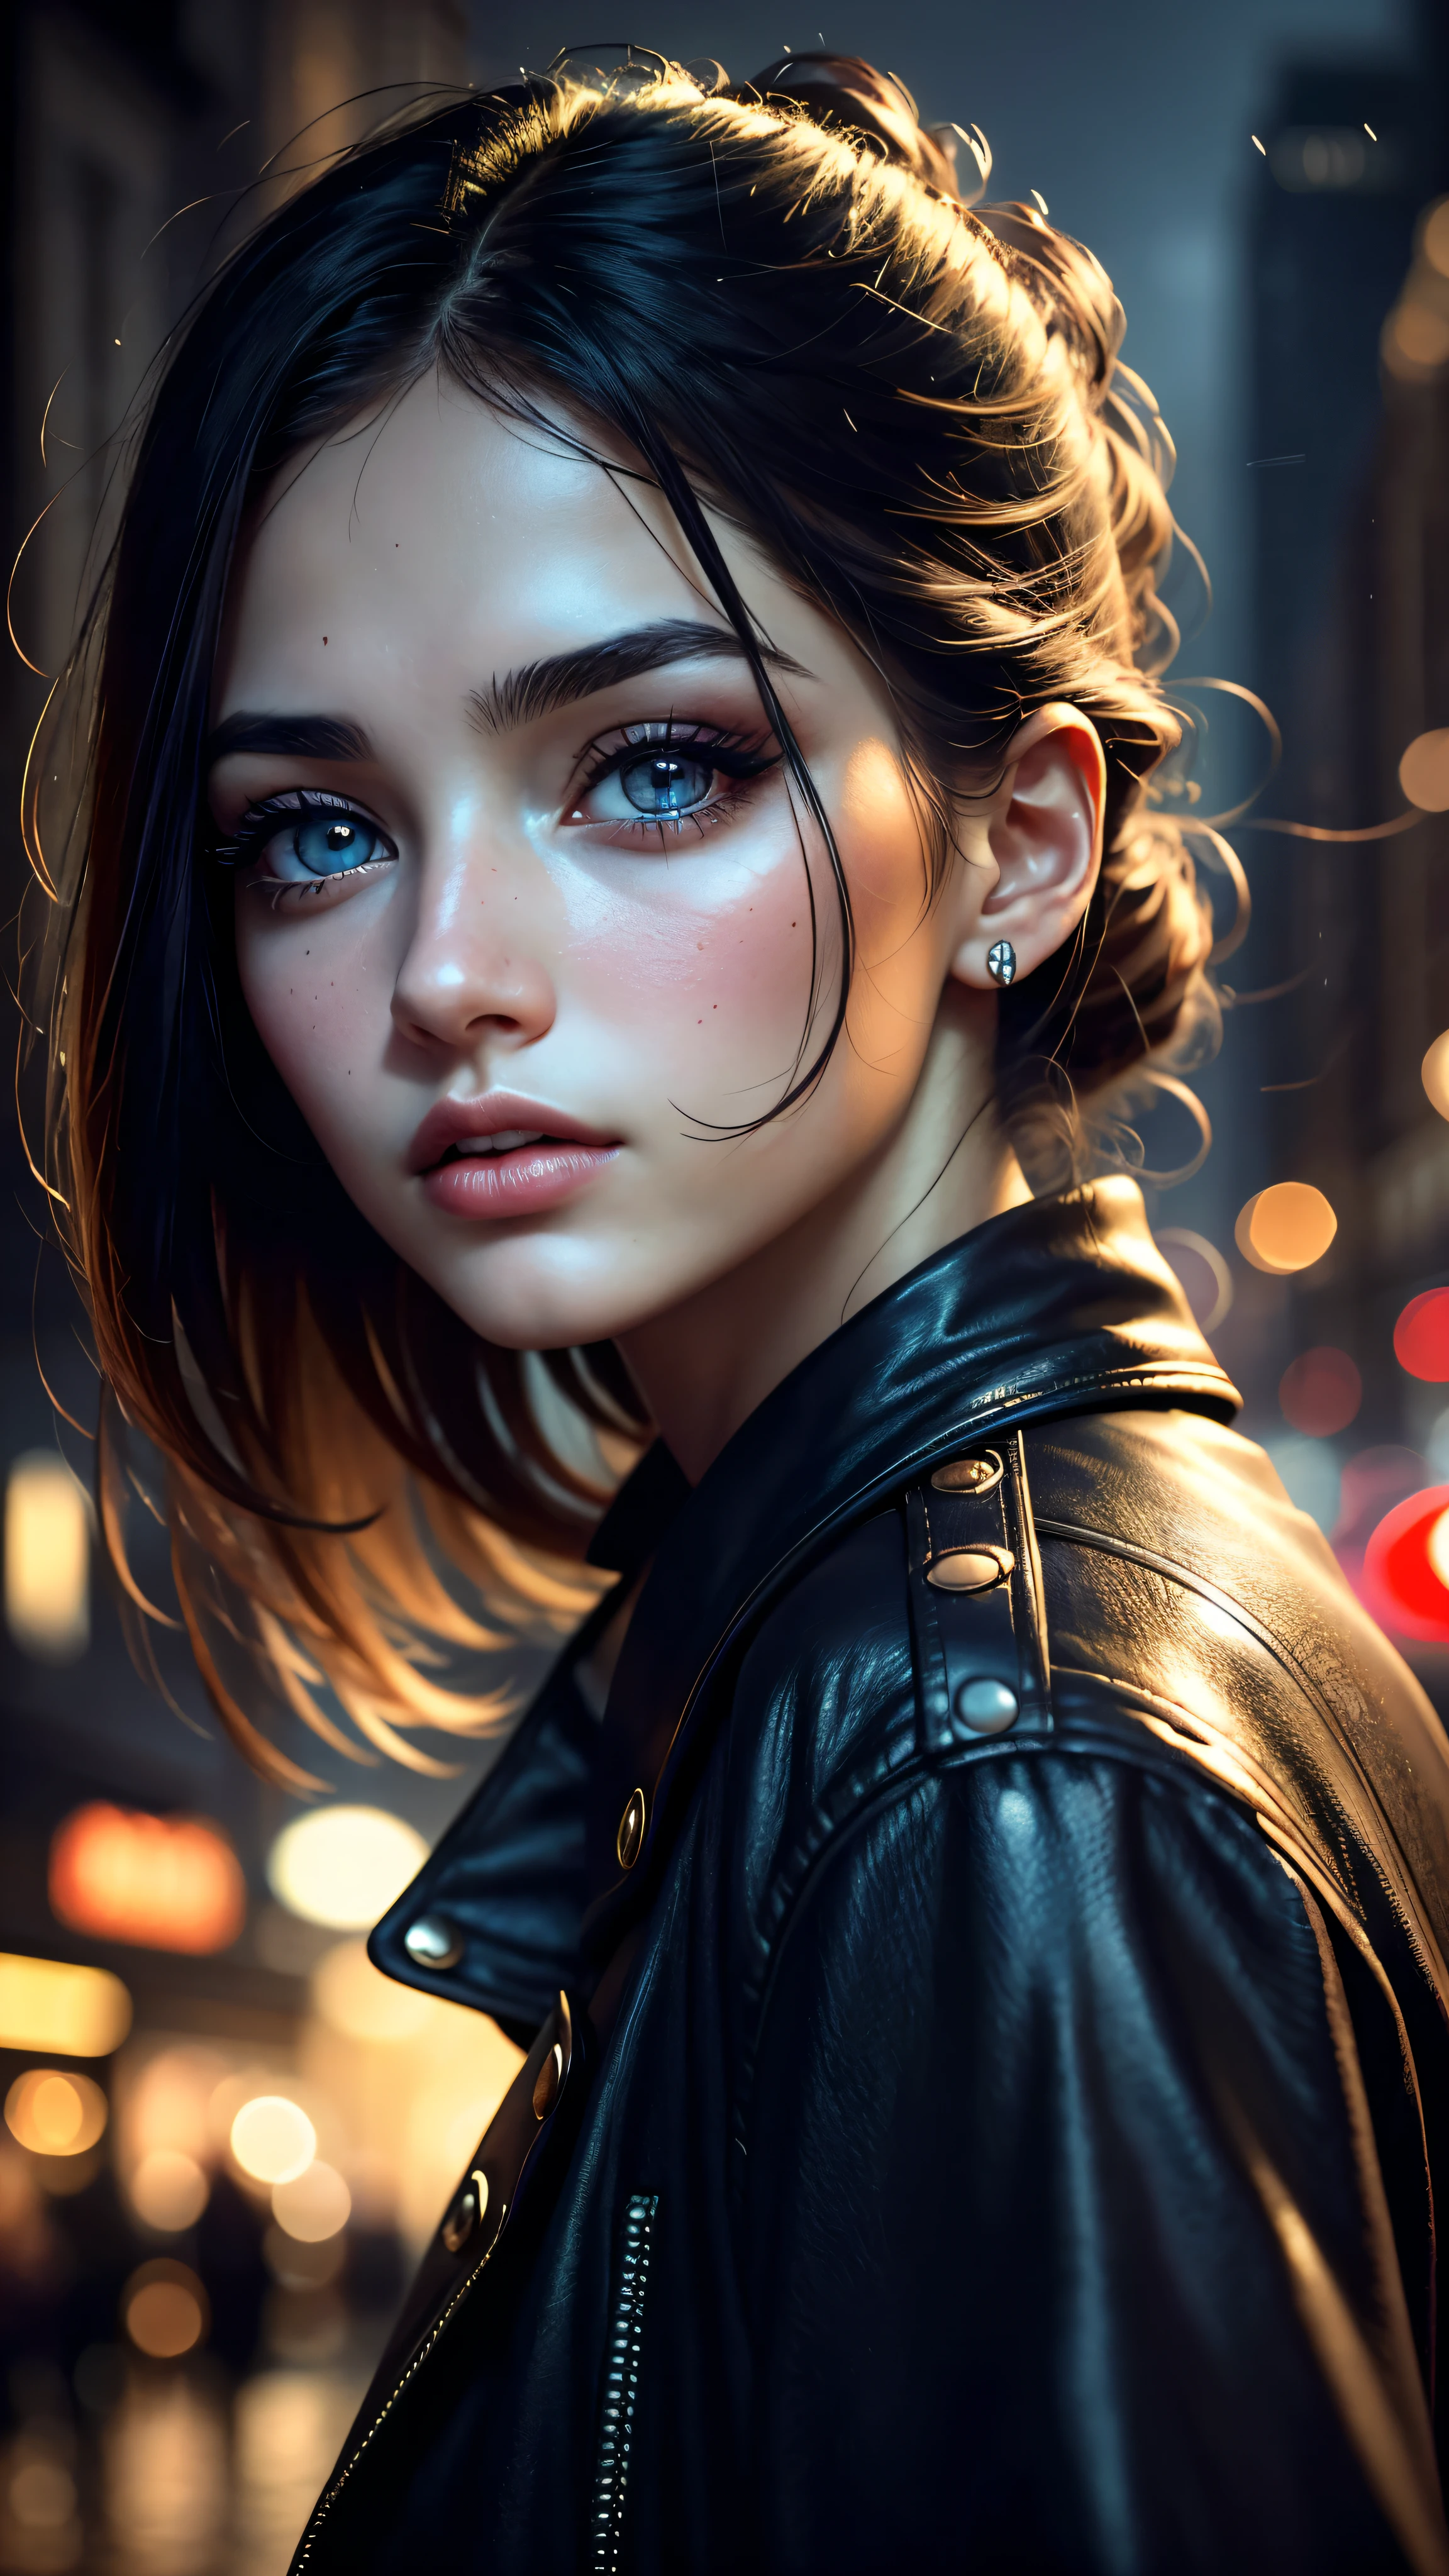 beautiful detailed eyes, beautiful detailed lips, extremely detailed eyes and face,long eyelashes, realism, high resolution, vibrant colors, urban setting, street view, nighttime scene, atmospheric lighting, moody ambiance, shadows and highlights, confident pose, serious expression, dynamic composition, cinematic style.